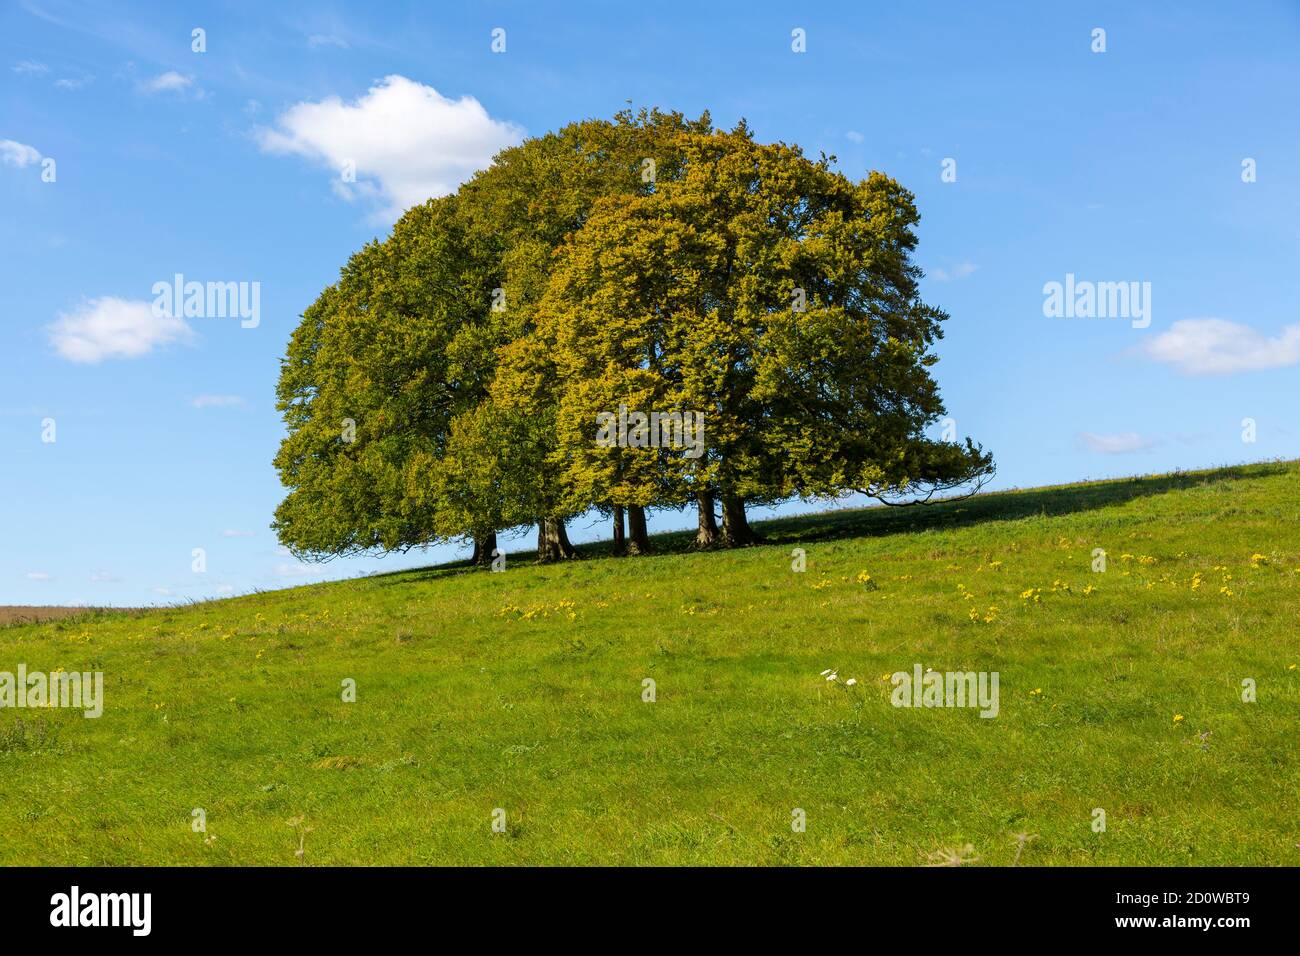 Landscape with clump of common beech trees blue sky on grassy green slope, Salisbury Plain, Wiltshire, England, UK Stock Photo